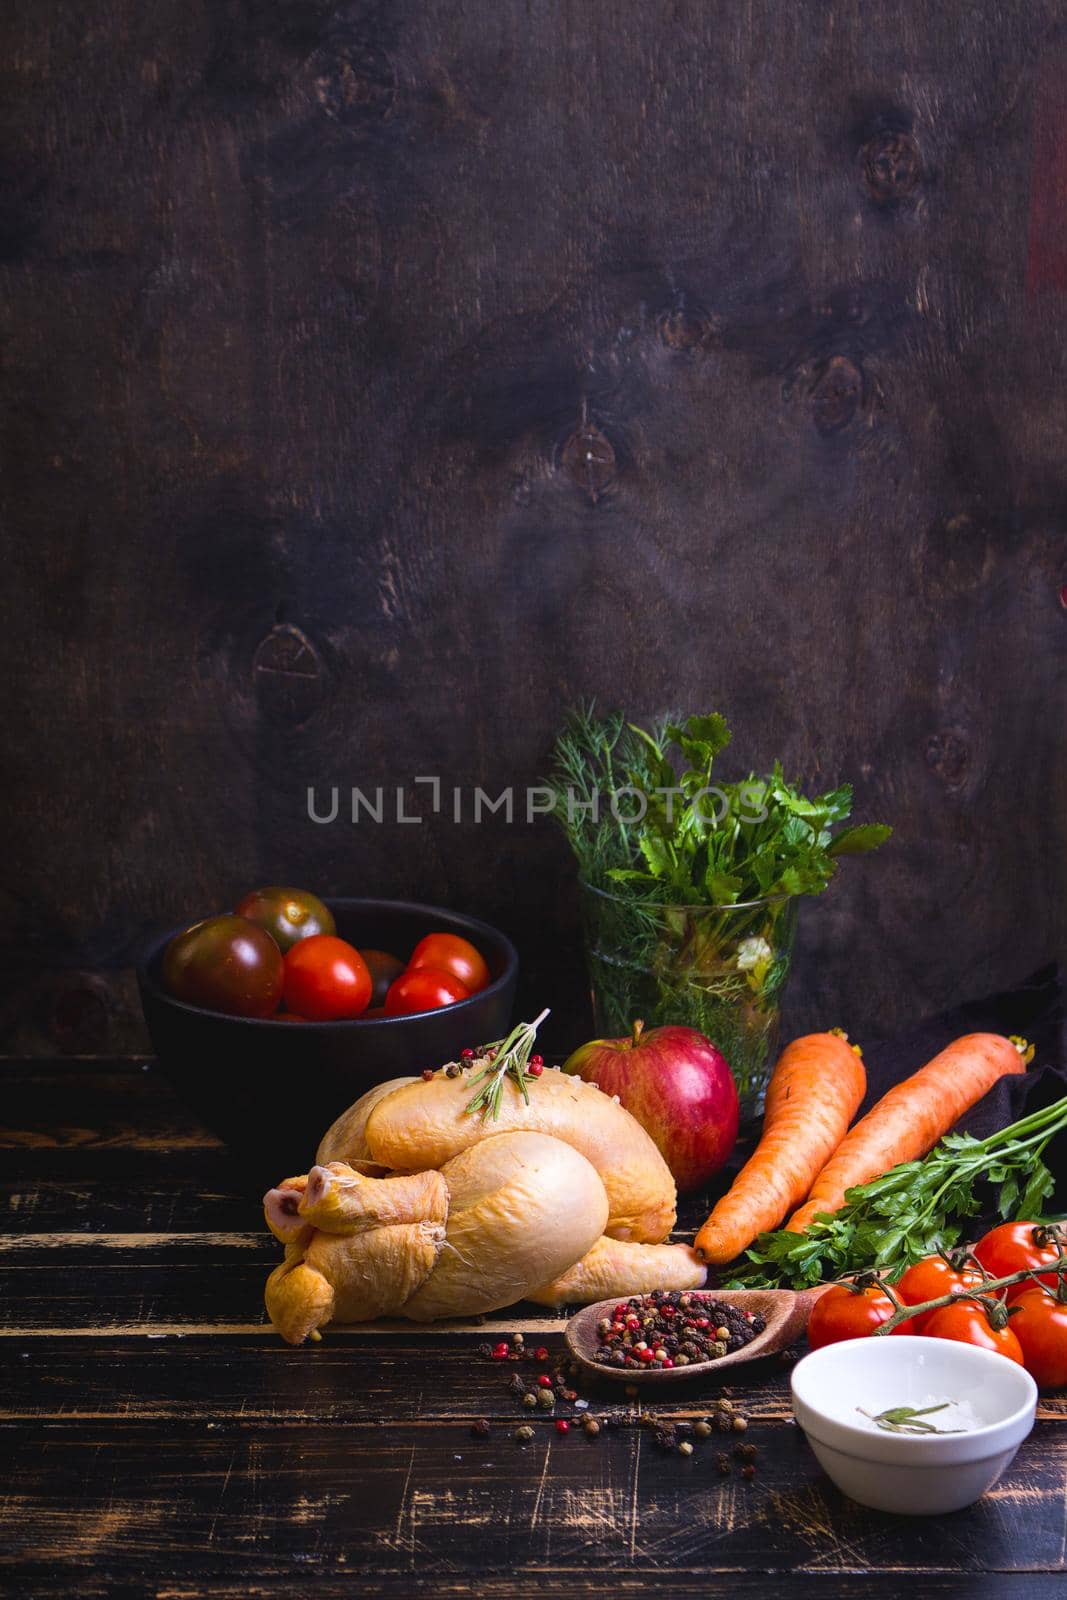 Raw whole chicken ready for cooking. Chicken, vegetables, herbs, spices on black rustic wooden background. Space for text. Food frame. Diet or healthy eating. Ingredients for cooking. Selective focus